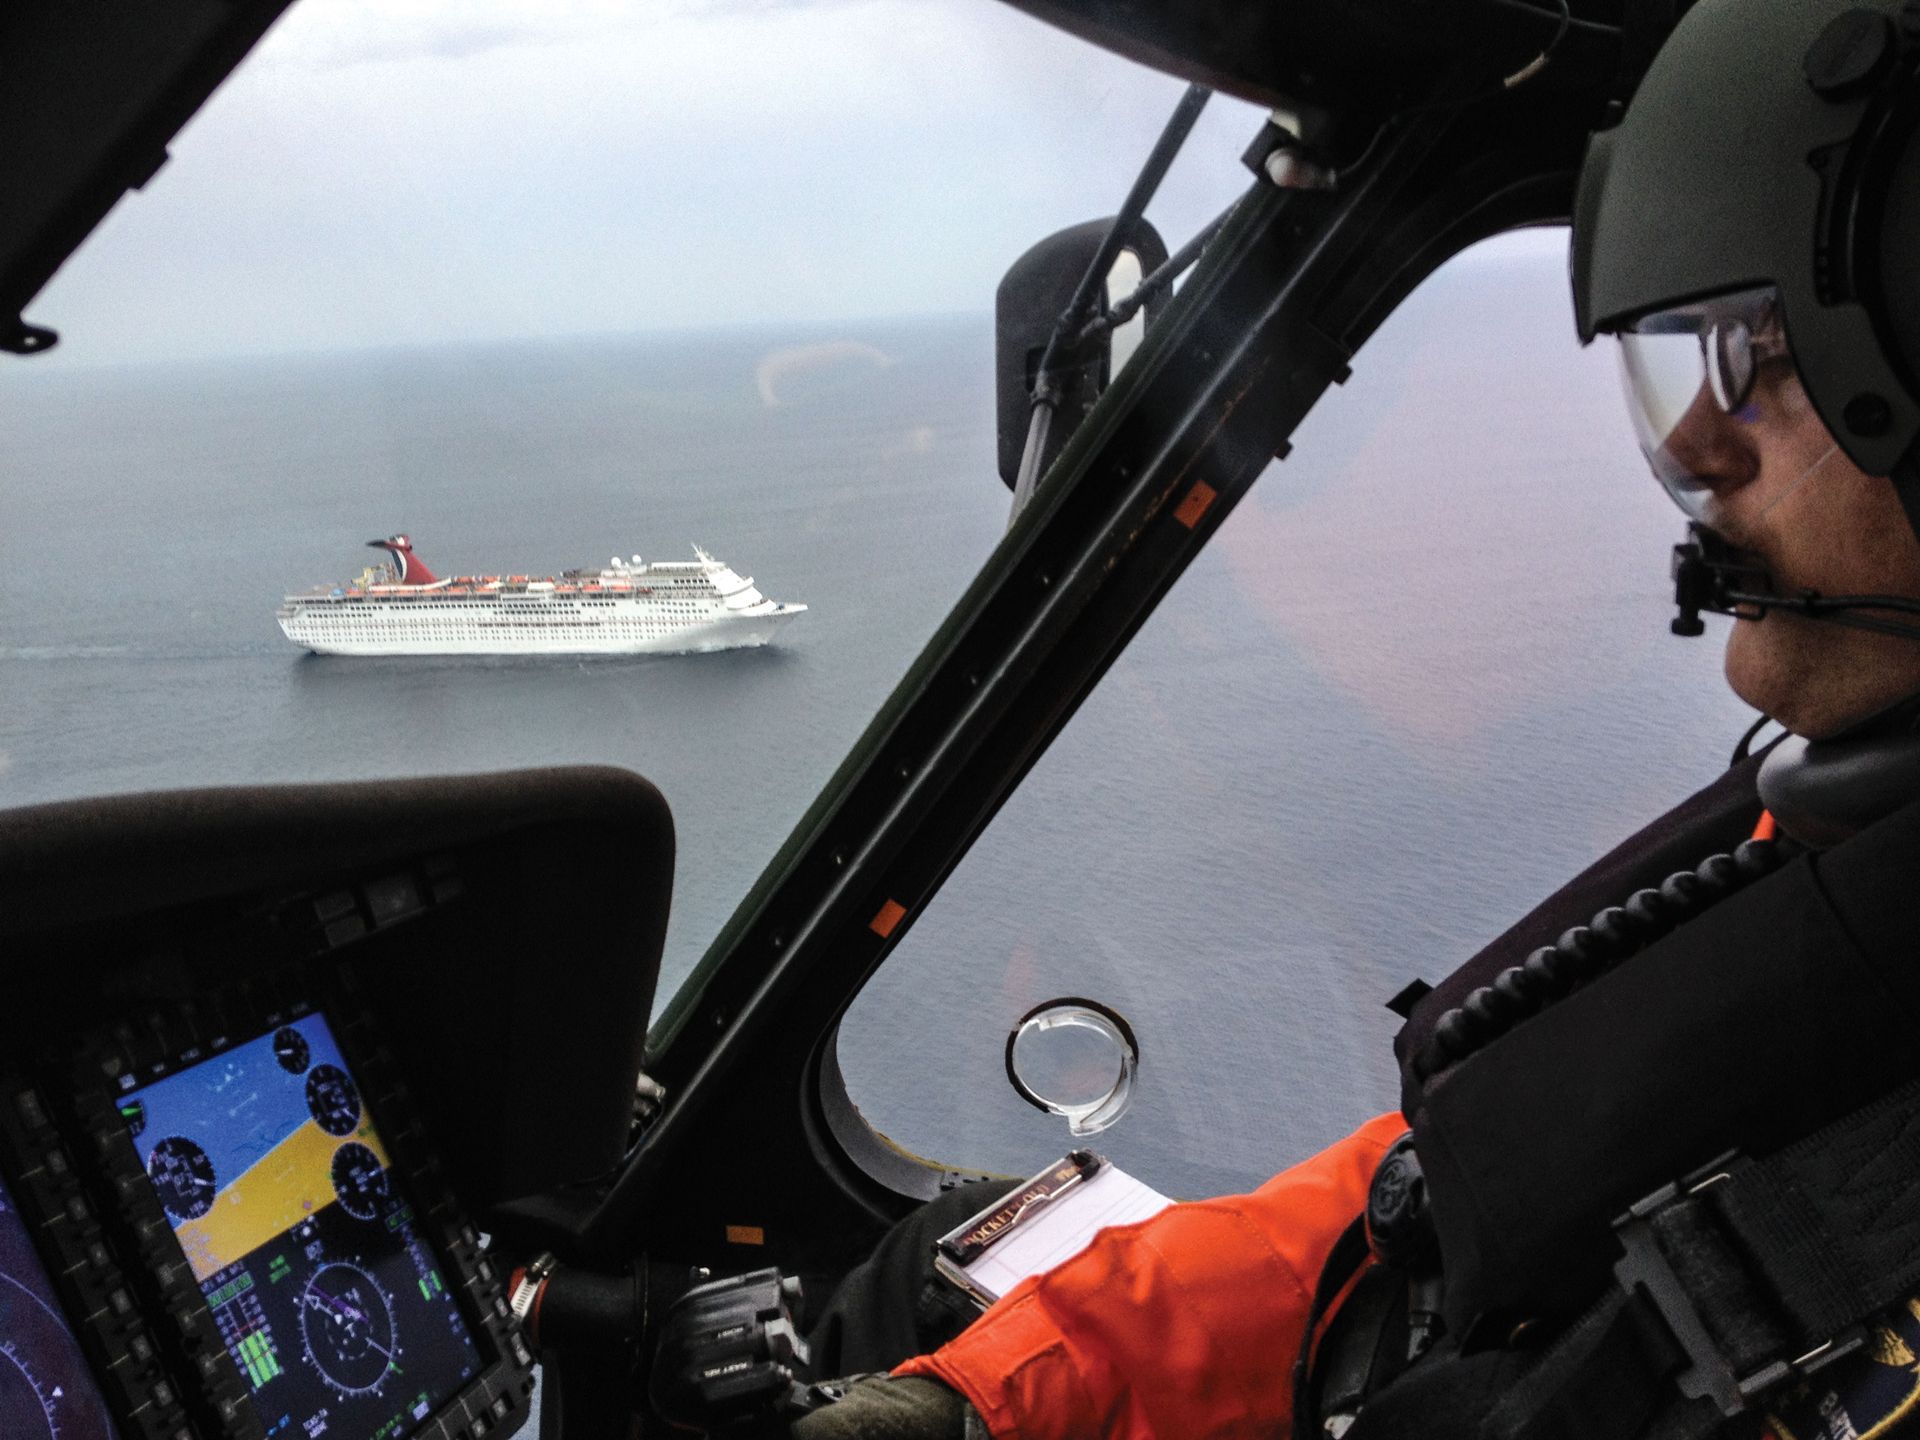 View out a Coast Guard helicopter with Jon at the controls and a cruise ship in the background